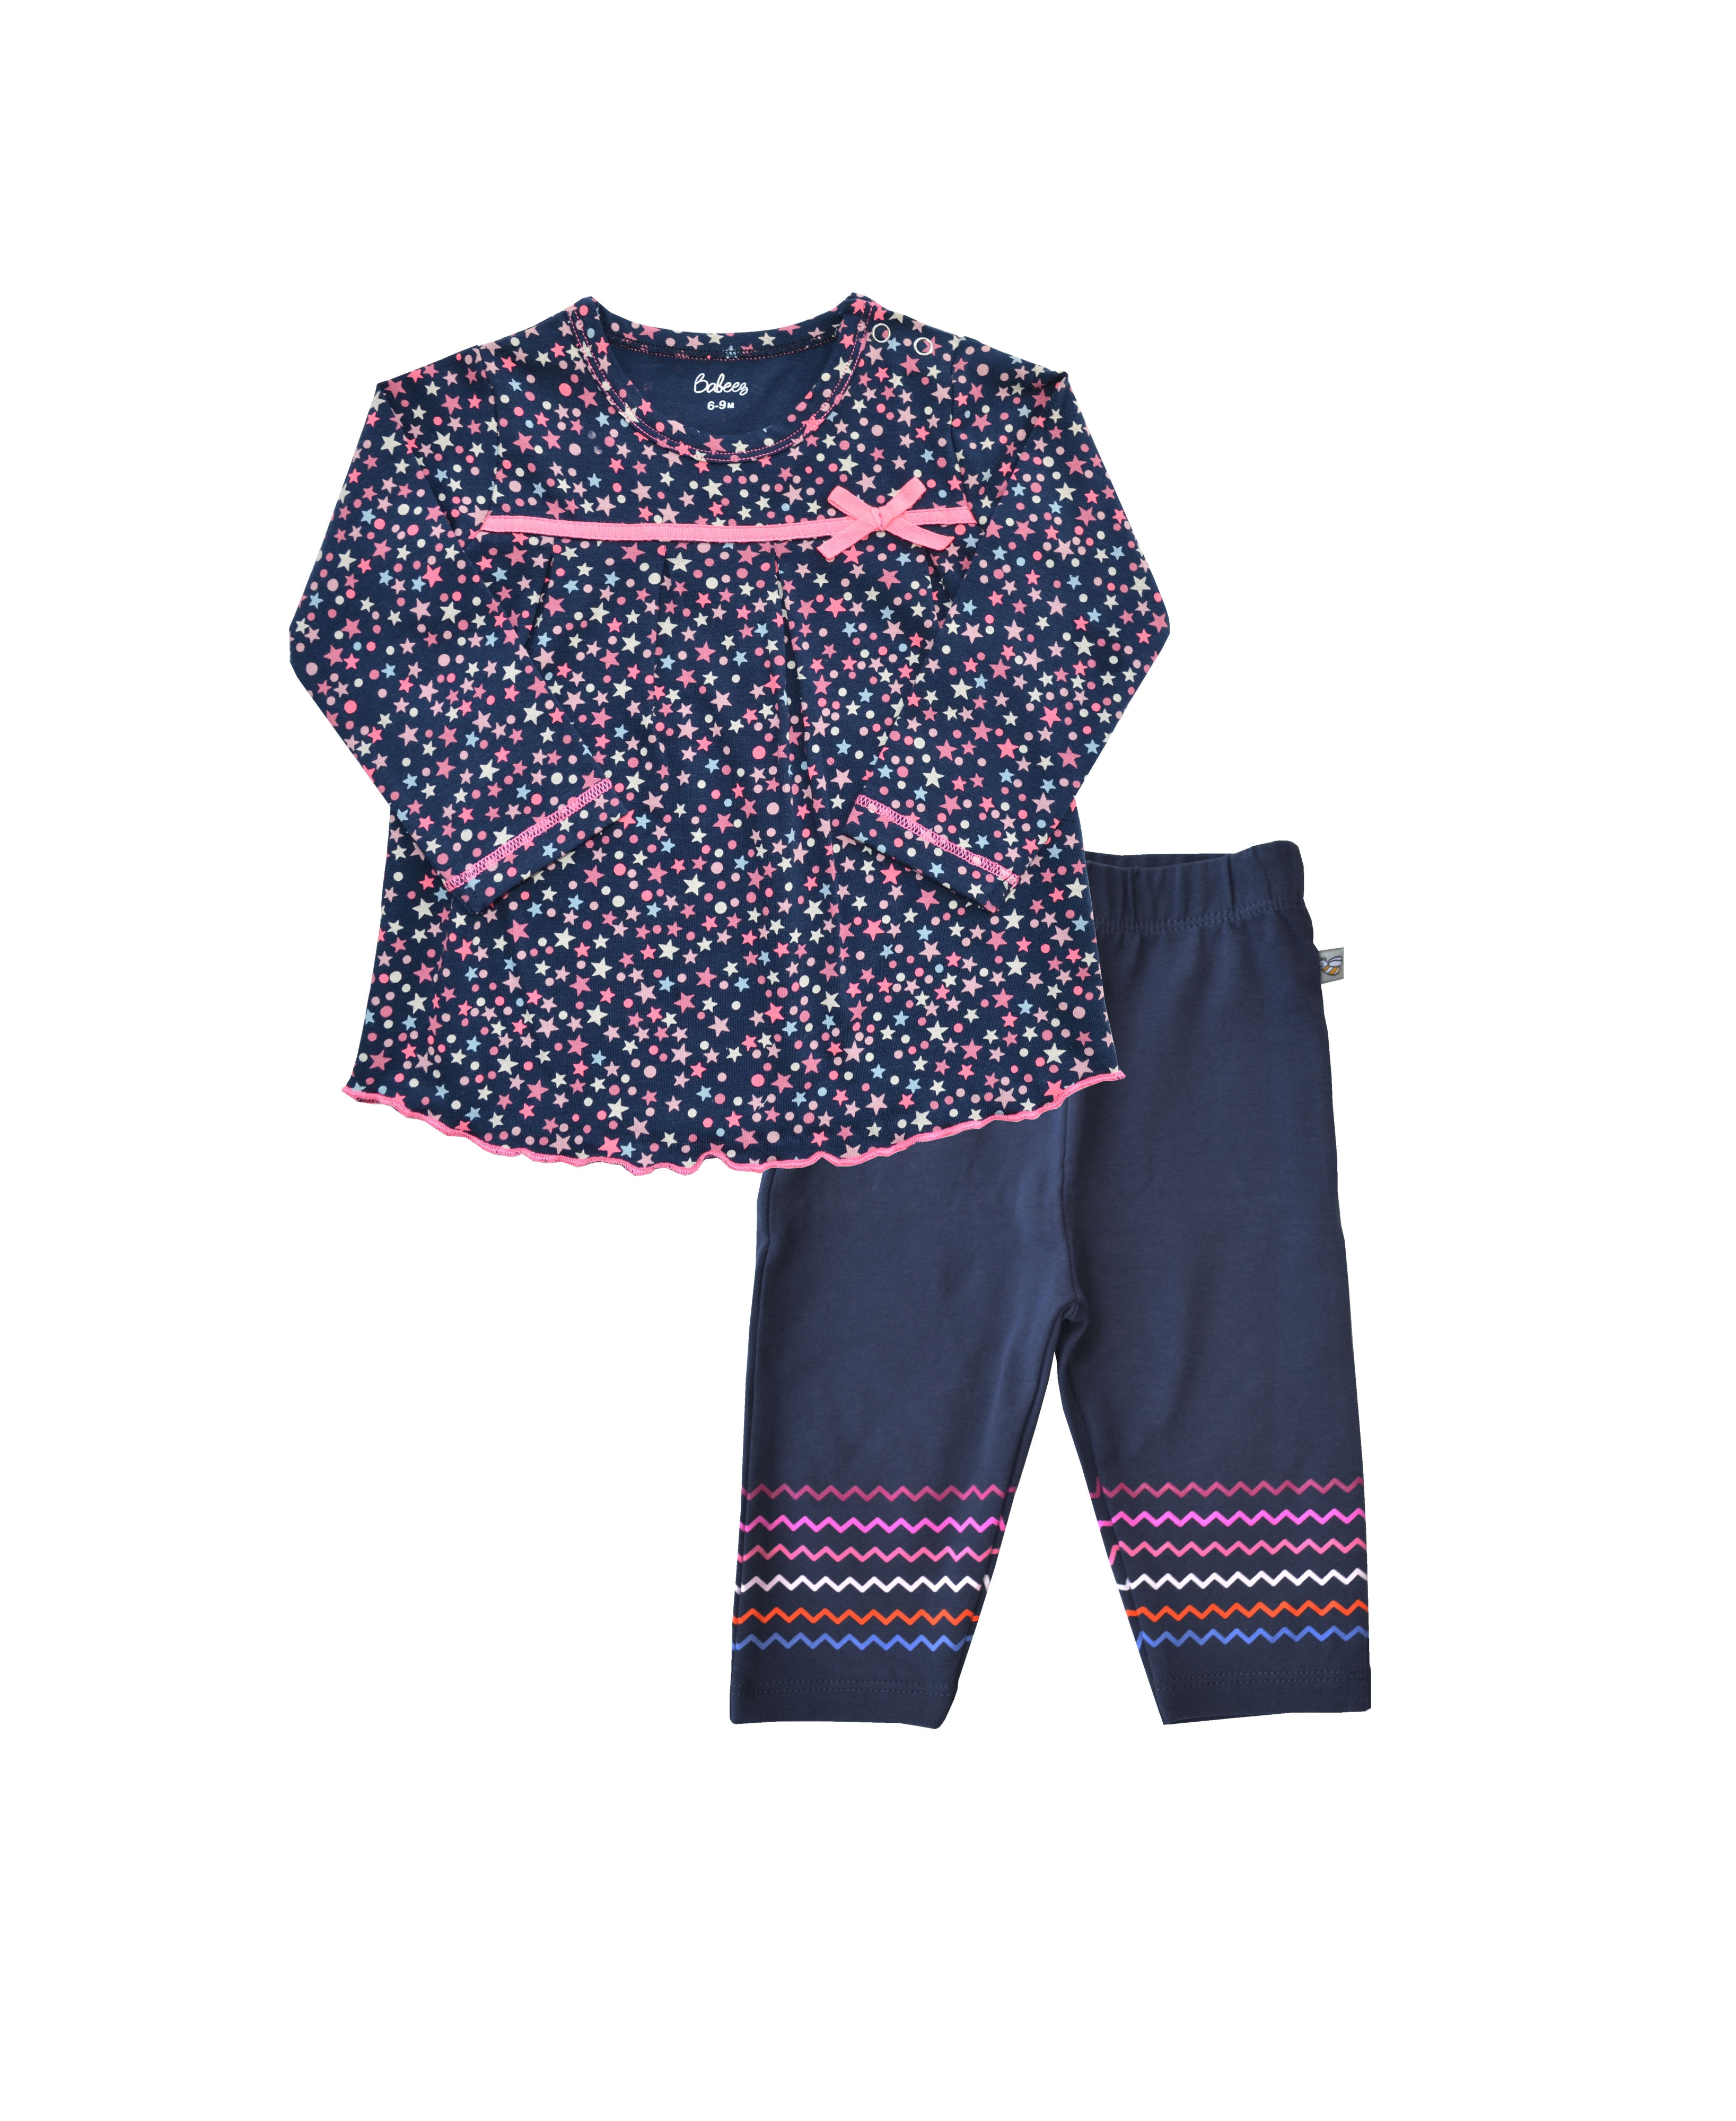 Babeez | Allover Star Print on Navy Long Sleeves Top and Navy Legging with Wave Print at Bottom (95%Cotton 5%Elasthan Jersey) undefined